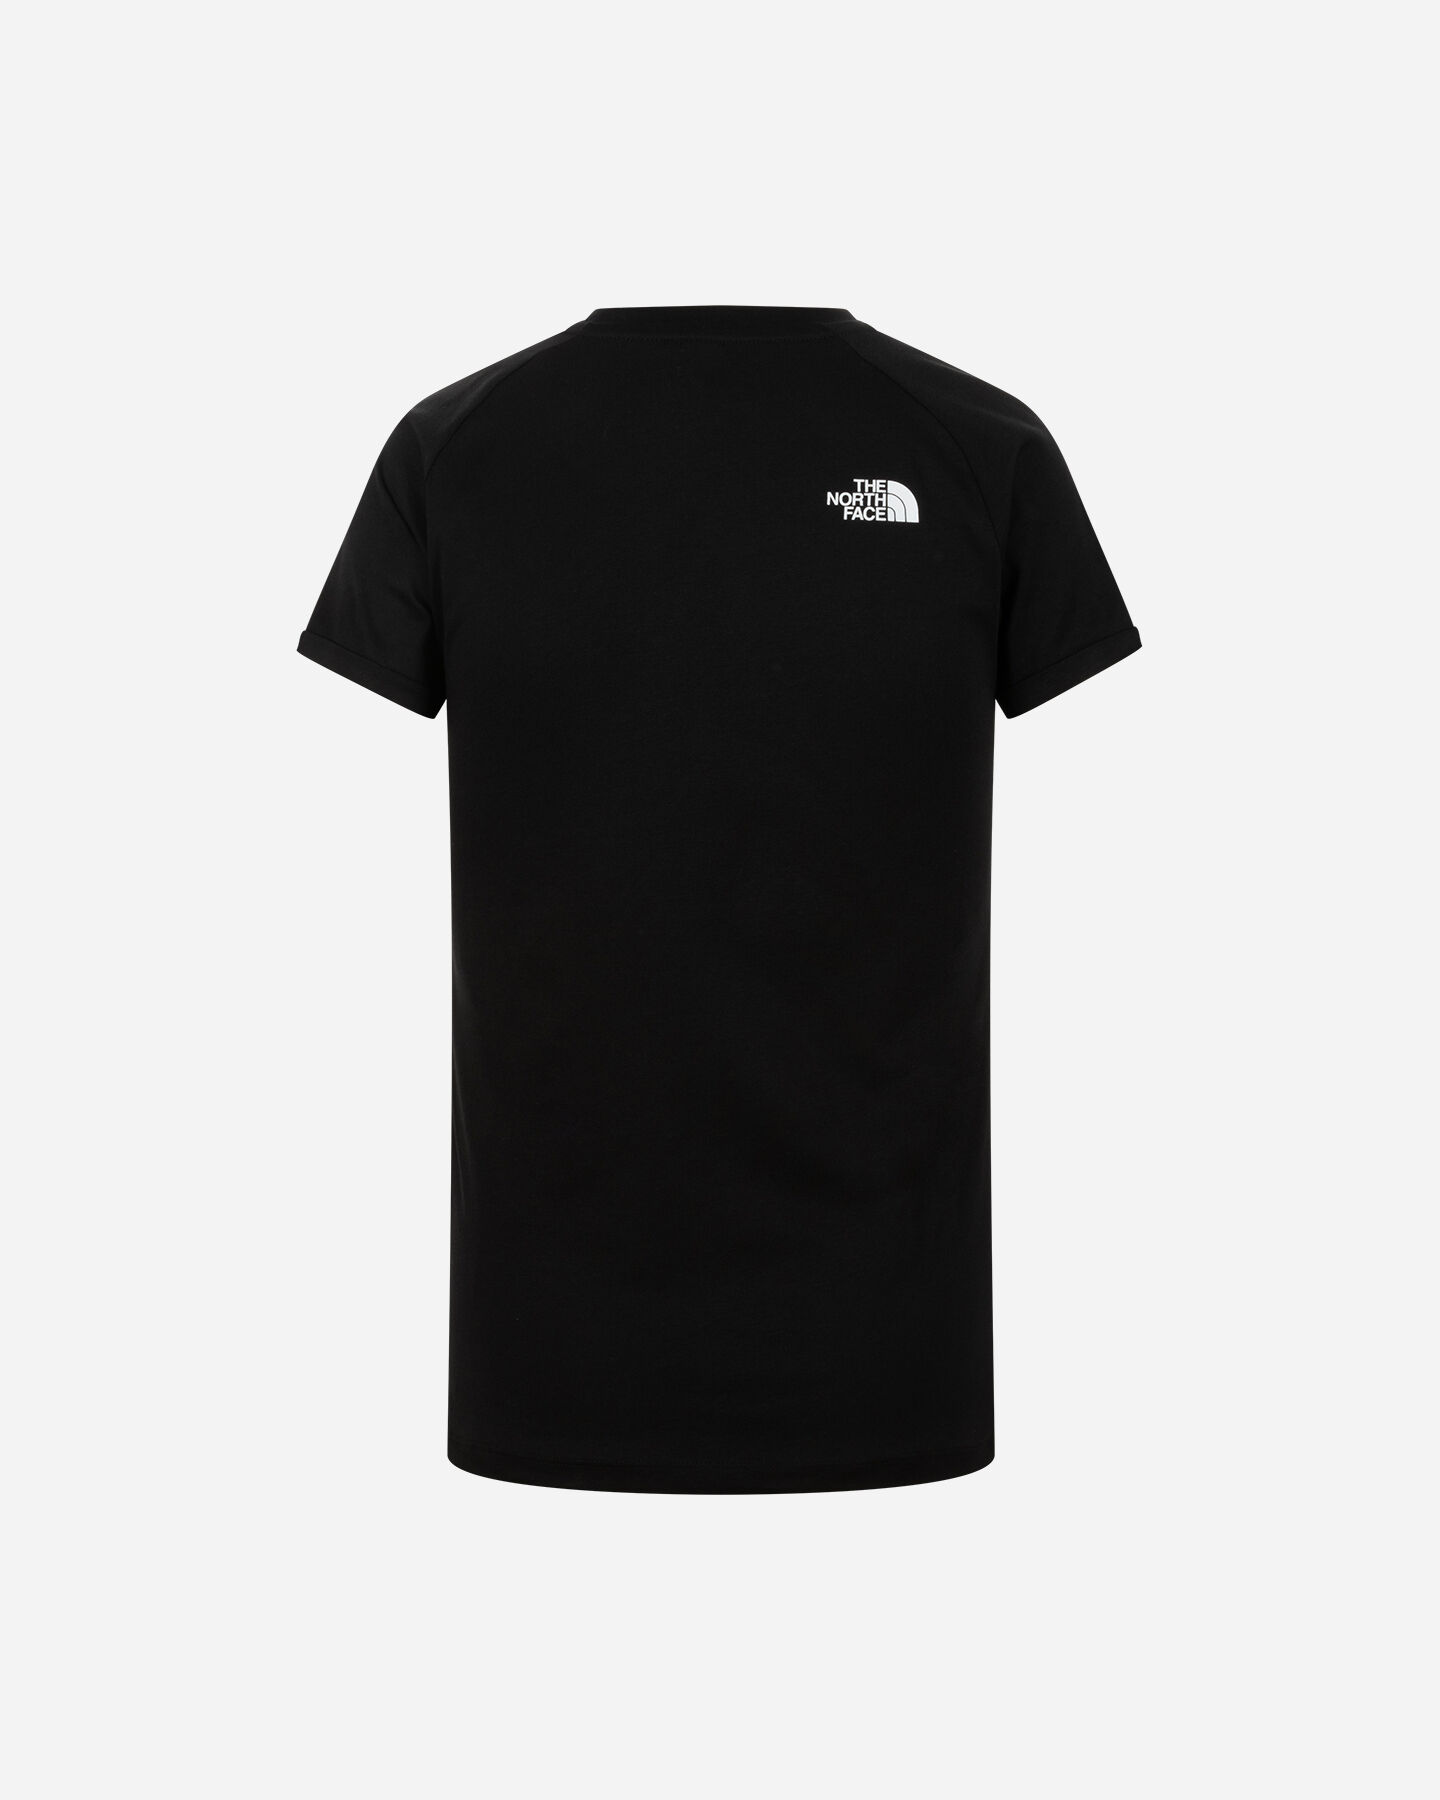  T-Shirt THE NORTH FACE LOGO W S5666519|JK3|XS scatto 1